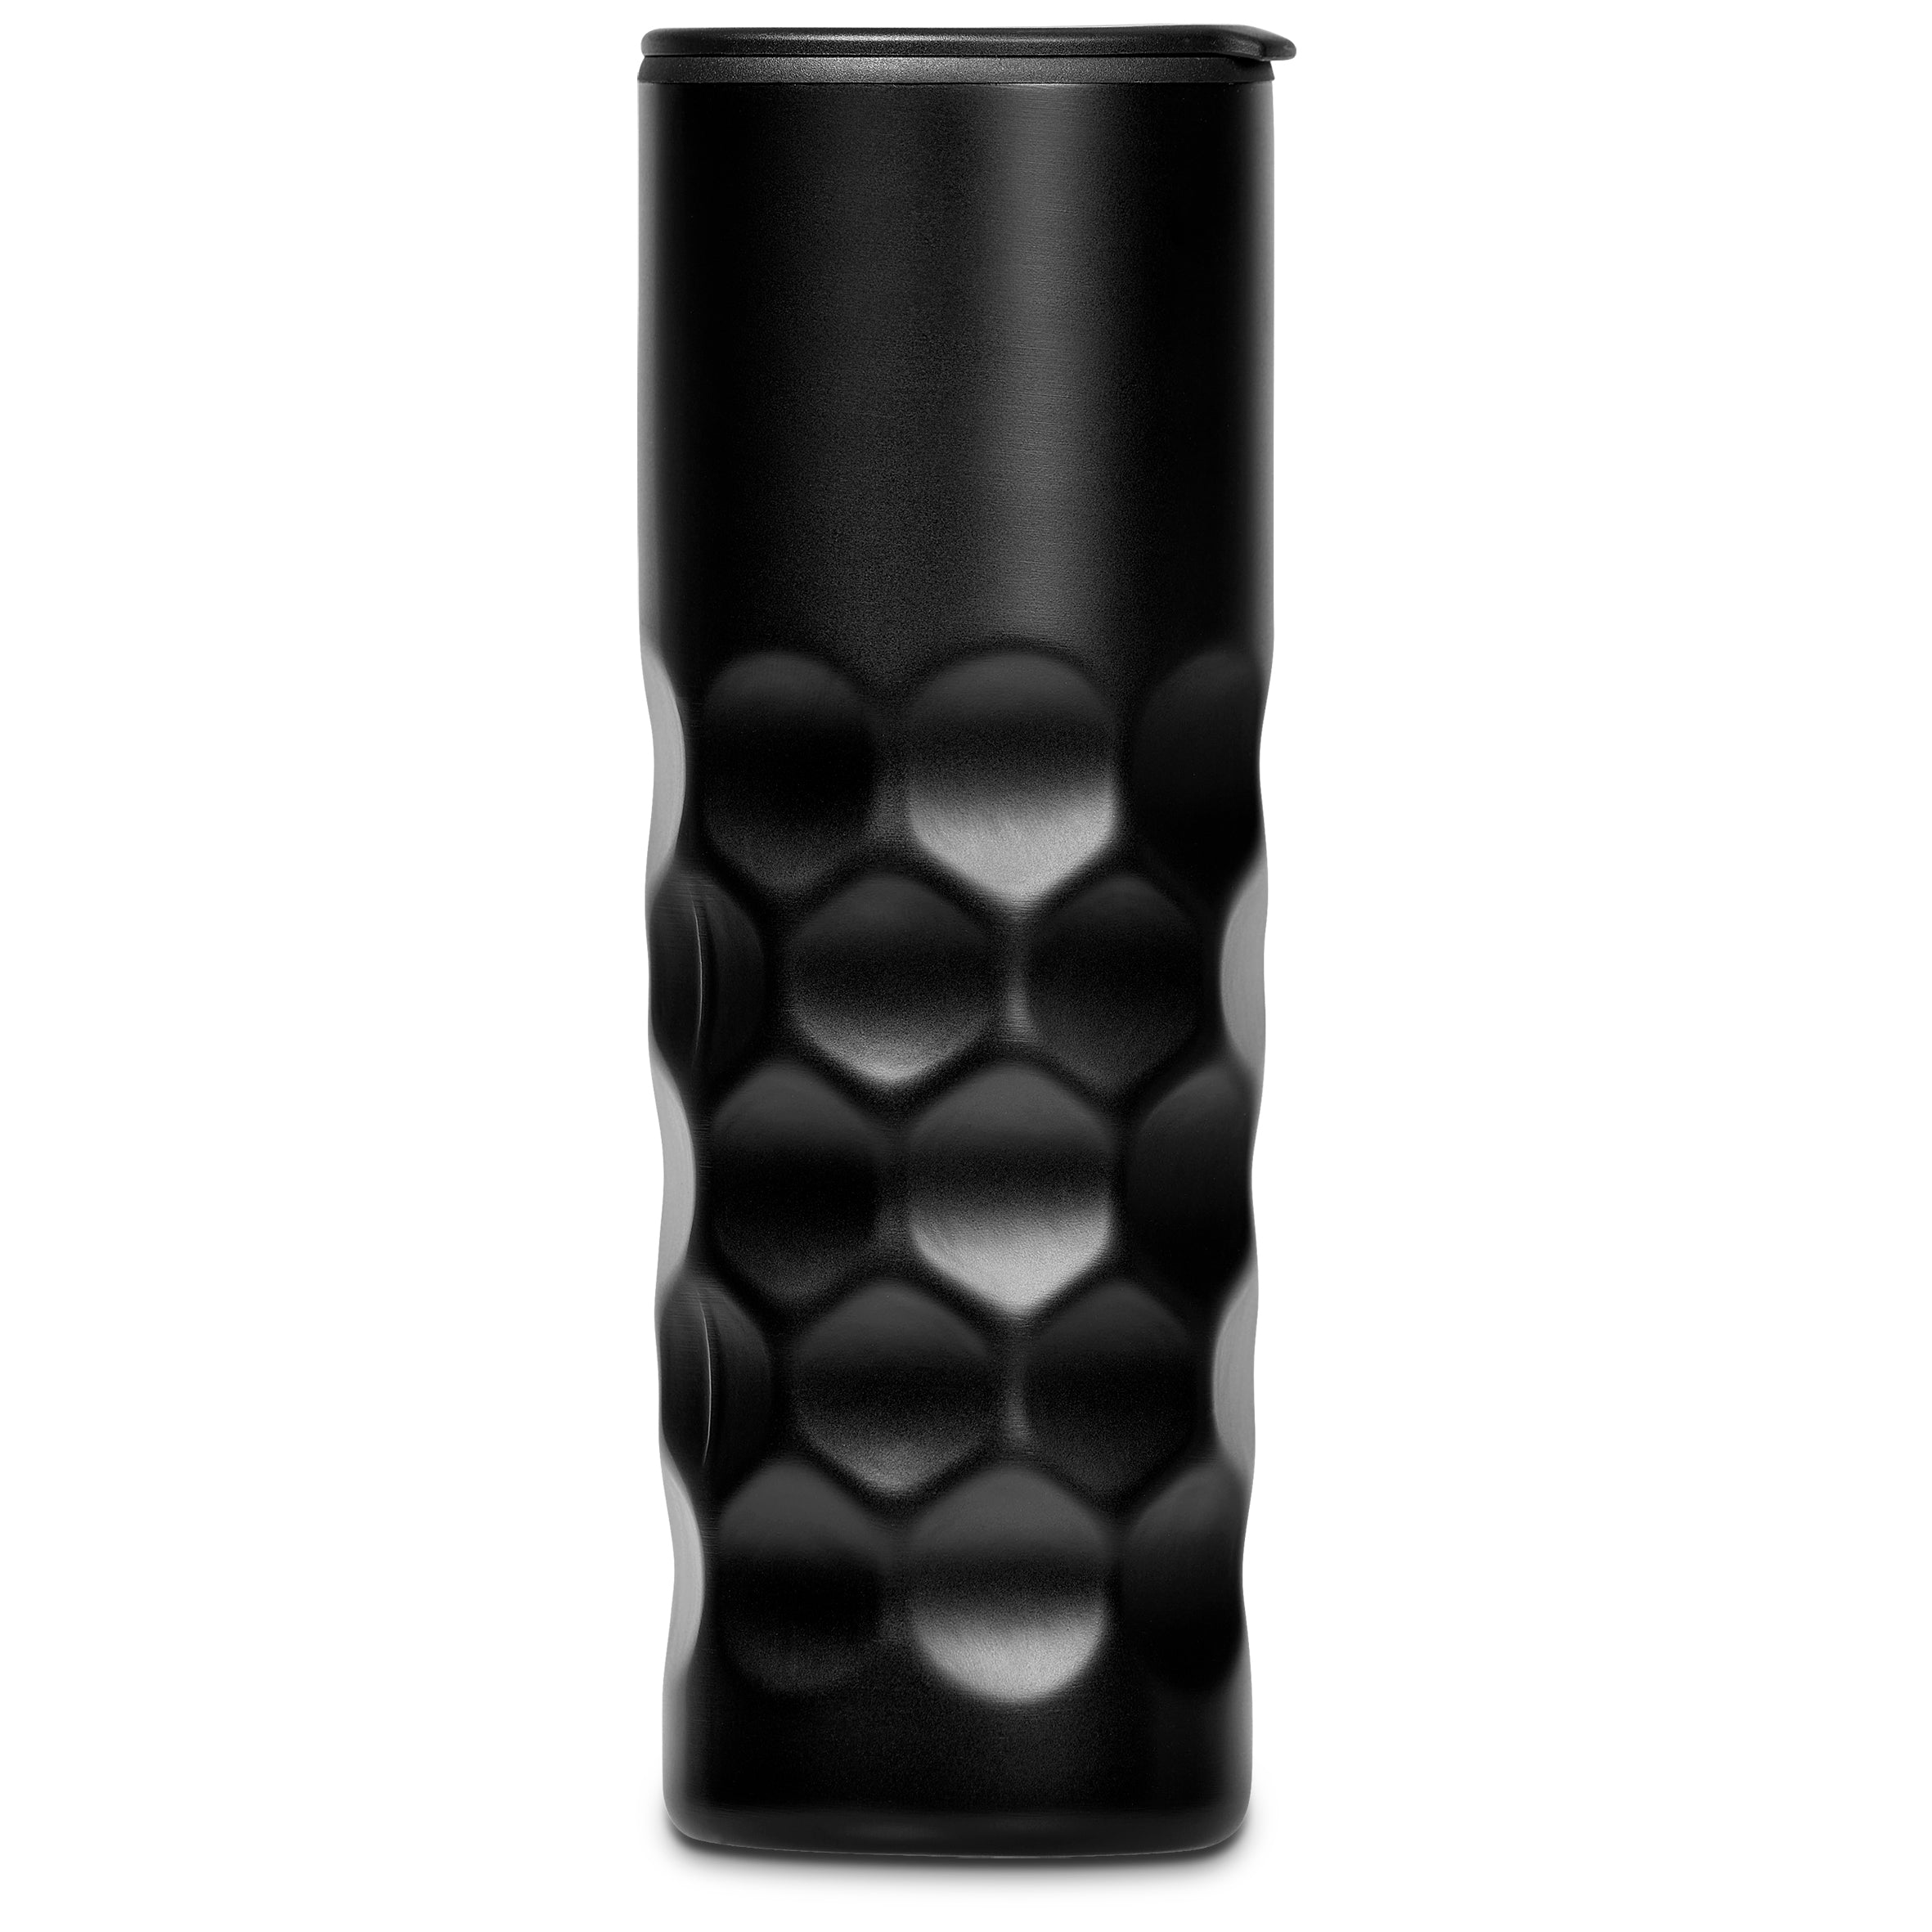 Stainless Steel and Plastic Double-Wall Tumbler - 450ml